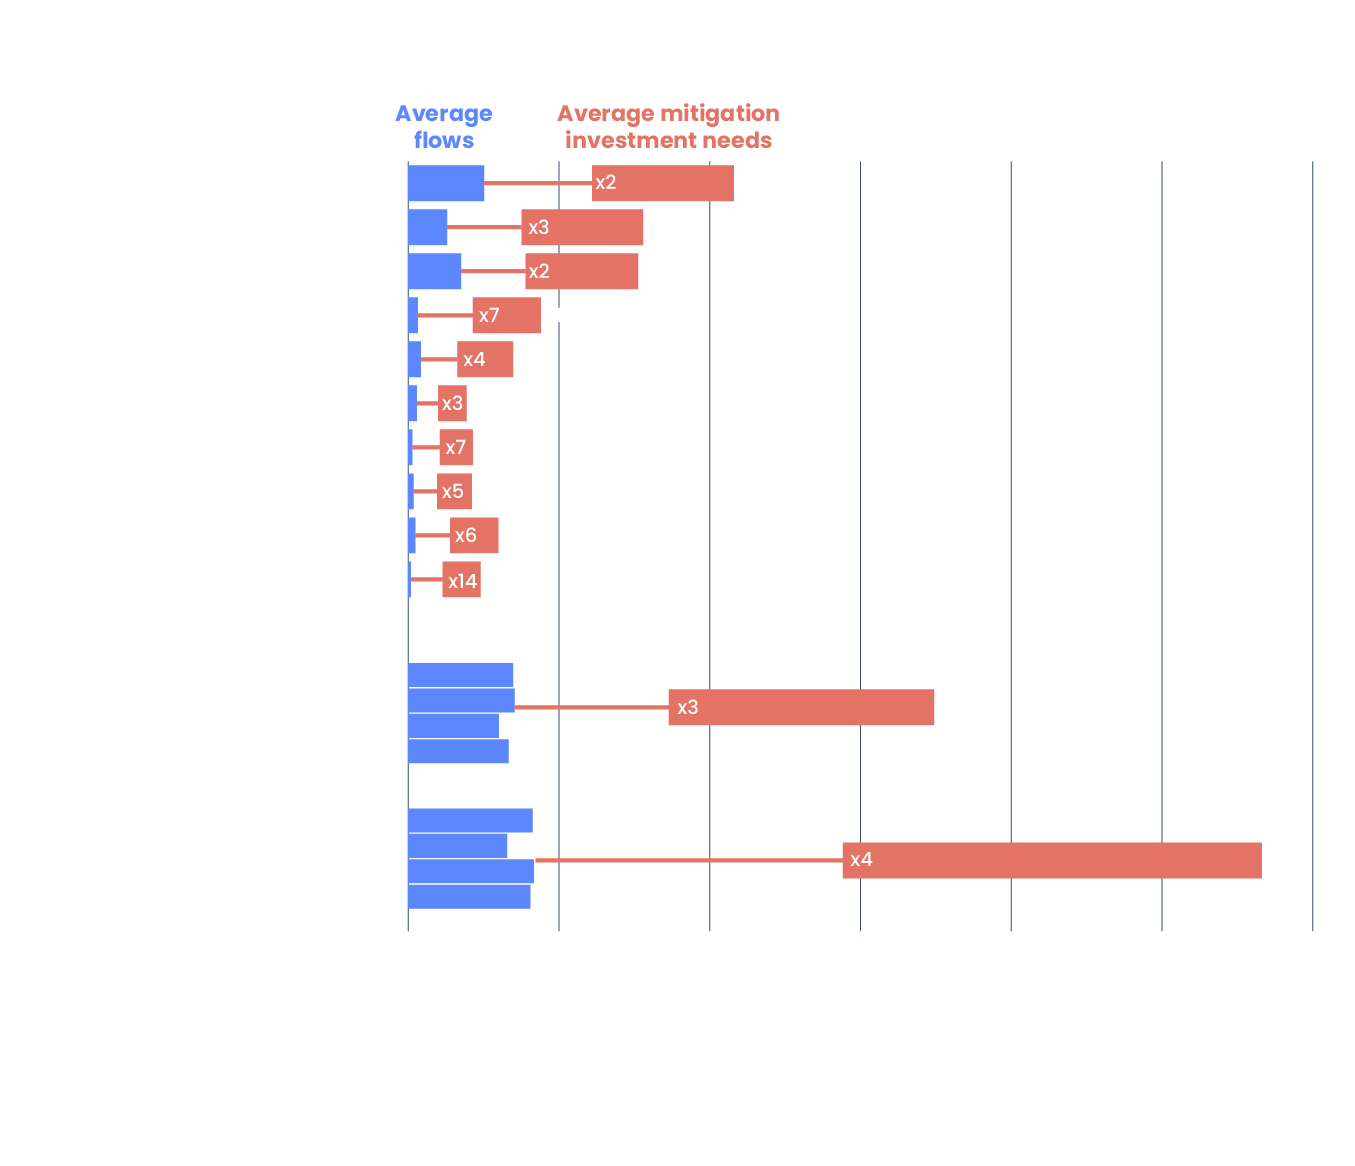 Breakdown of average investment flows and needs until 2030